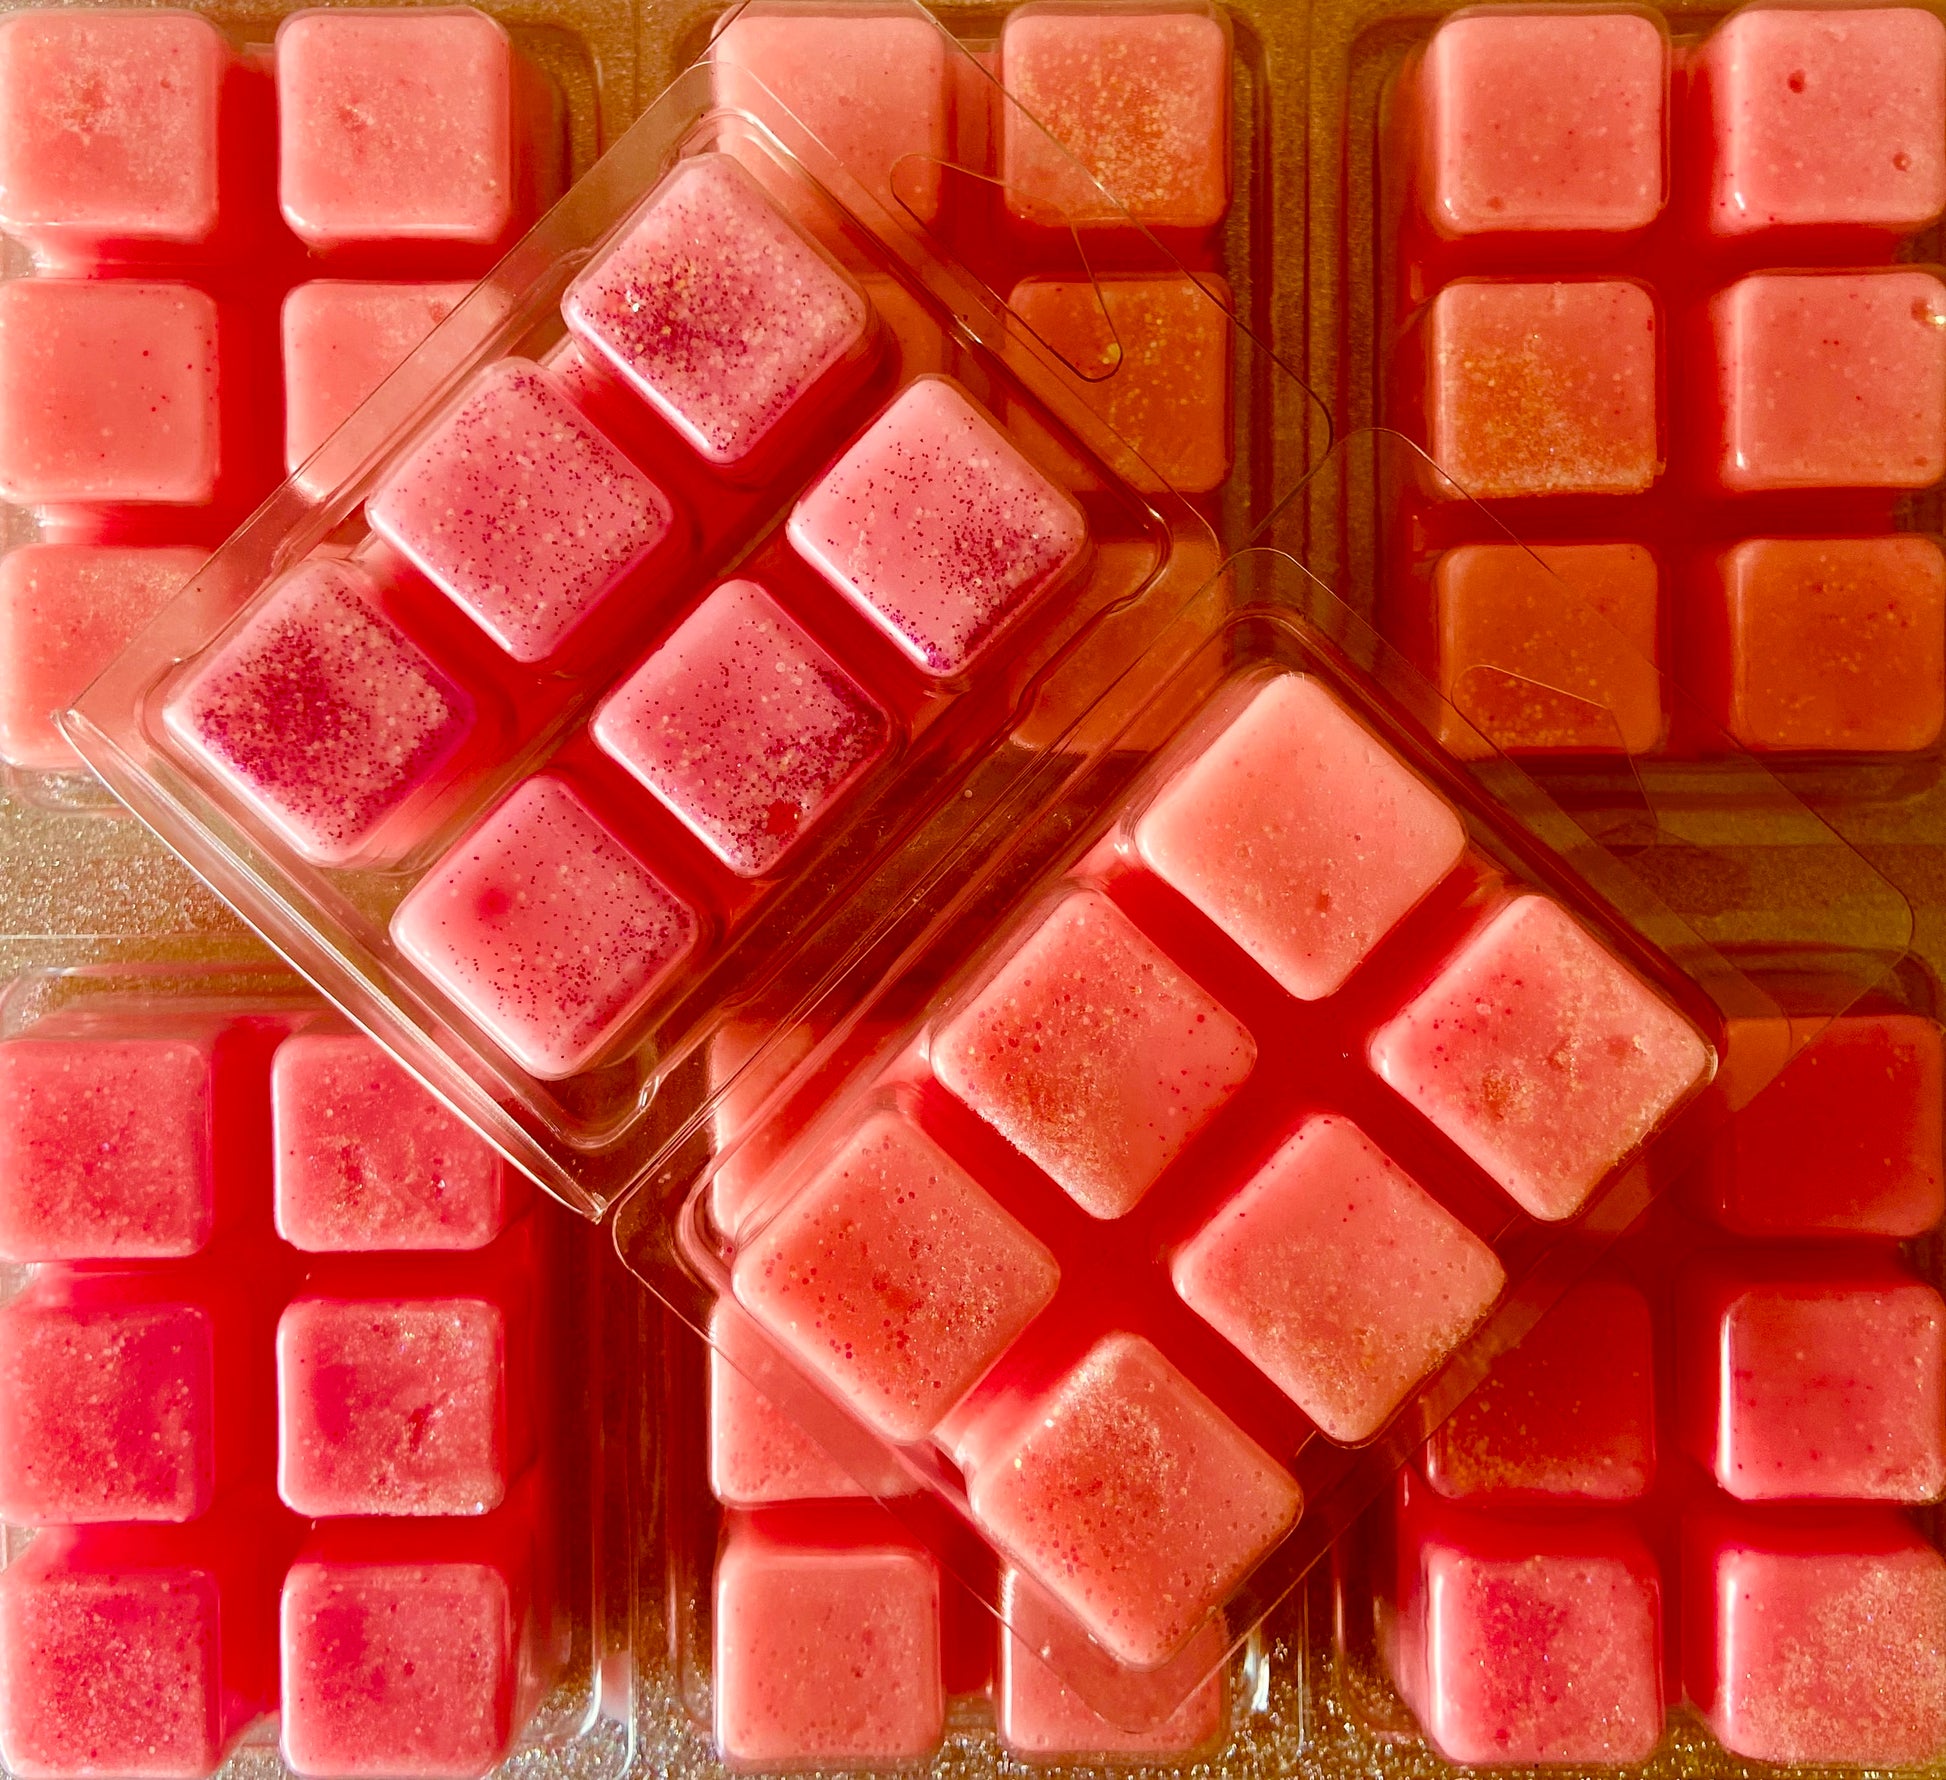 Trays of Spiced Blackberry Jam wax melts from The Soap Gal x, sprinkled with glitter, stacked and arranged neatly, casting soft light reflections.